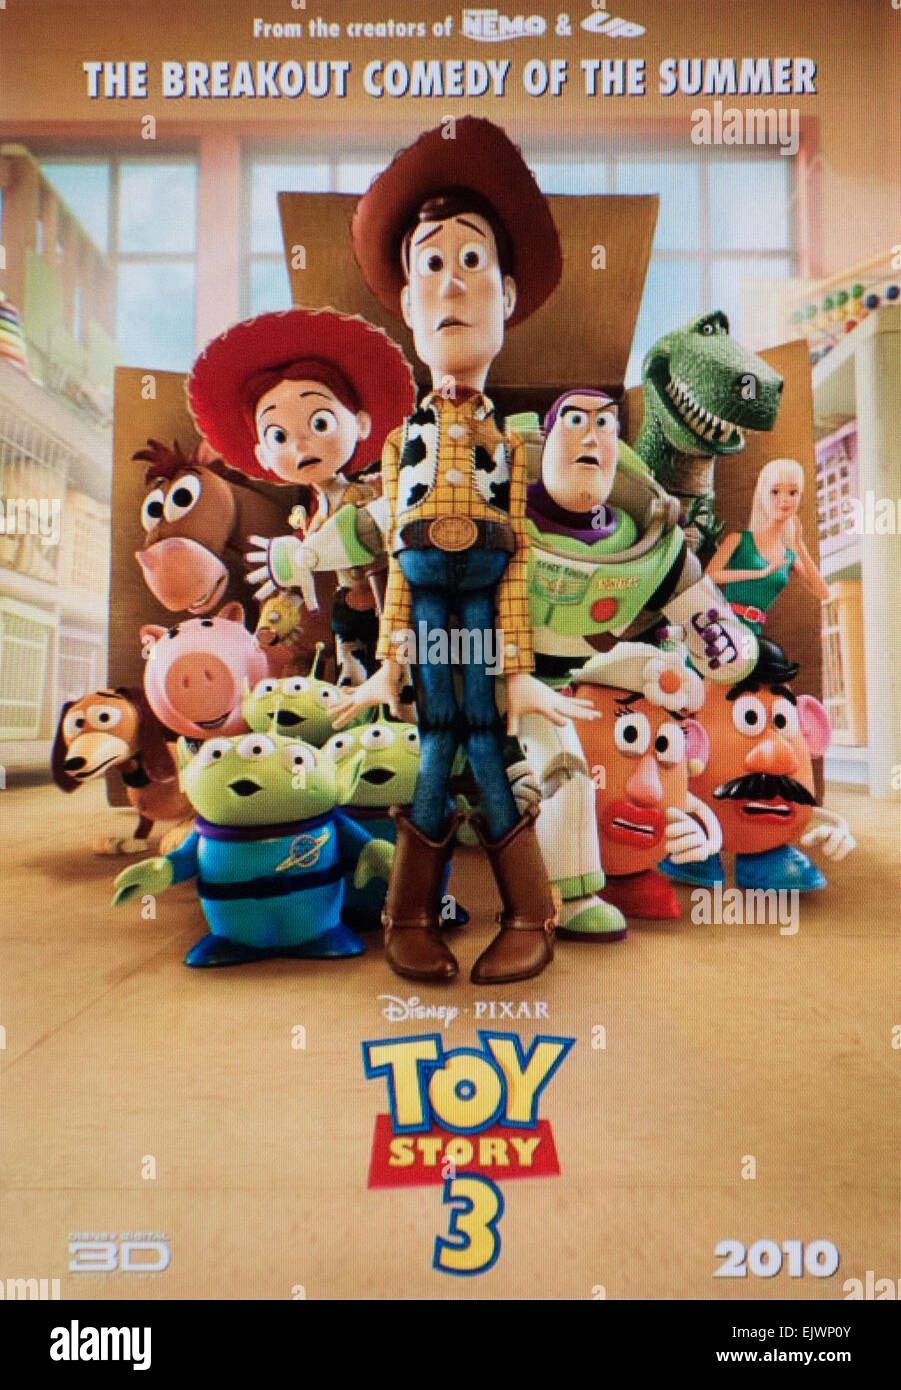 'toy story 3' movie poster Stock Photo